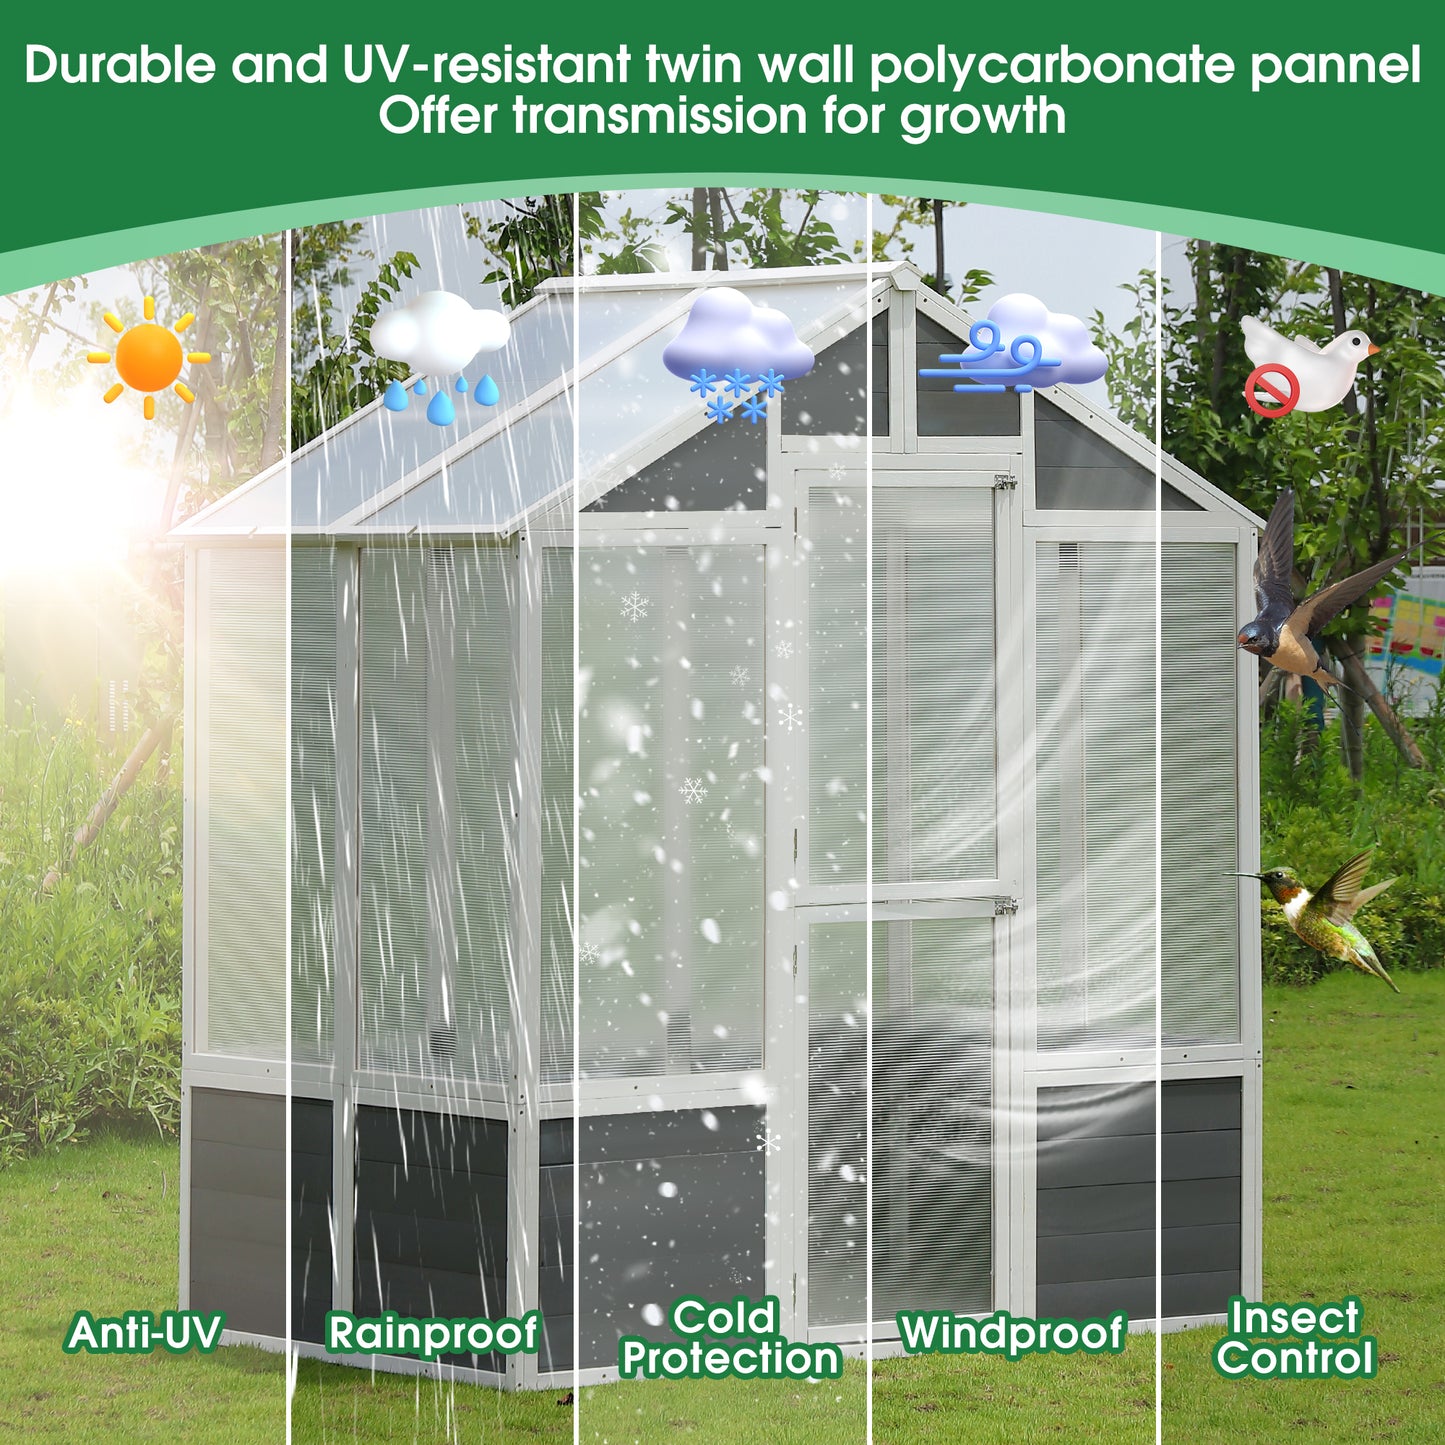 76''x48''x86'' Polycarbonate Greenhouse, Walk-in Outdoor Plant Gardening Greenhouse for Patio Backyard Lawn, Cold Frame Wooden Greenhouse Garden Shed for Plants, Grow House with Front Entry Door